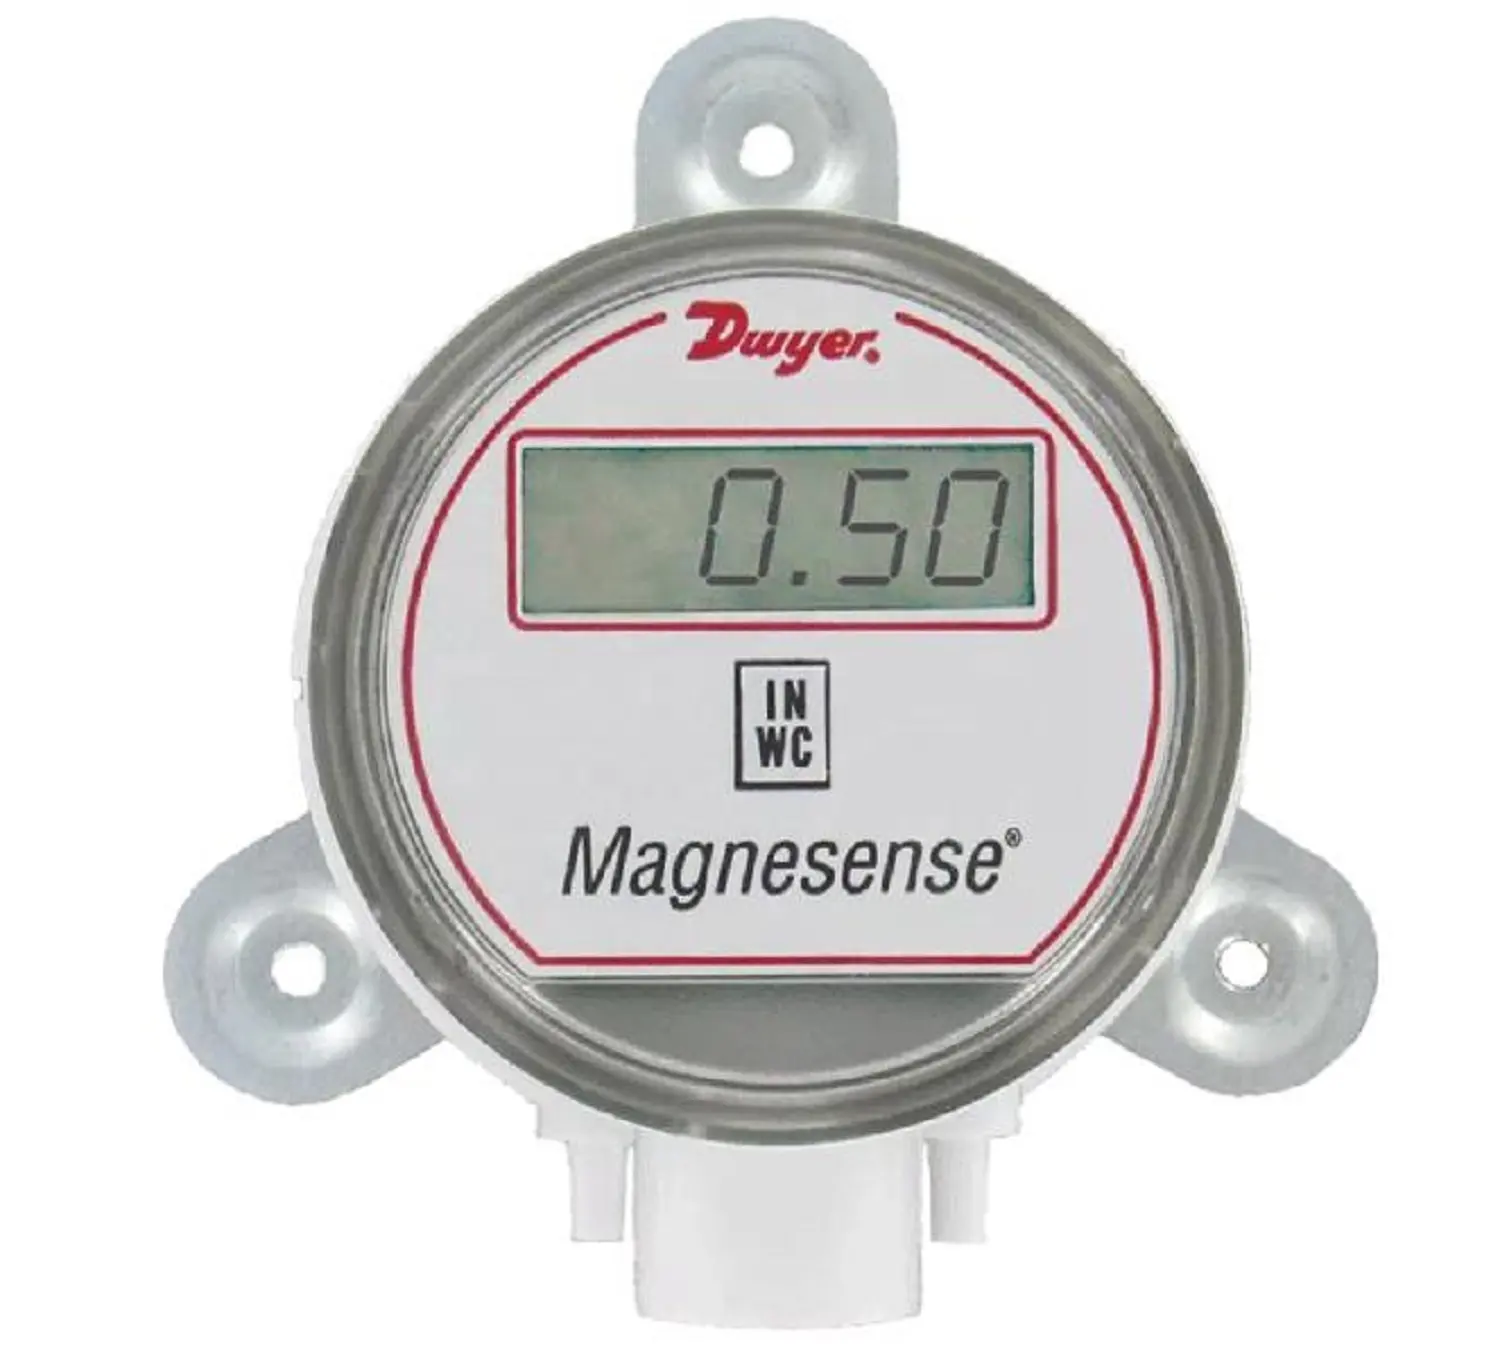 Hohe Qualität Dwyer Serie MS Magnese nse Differenz druckt rans mitter MS-121 MS-021 MS-321 MS-921